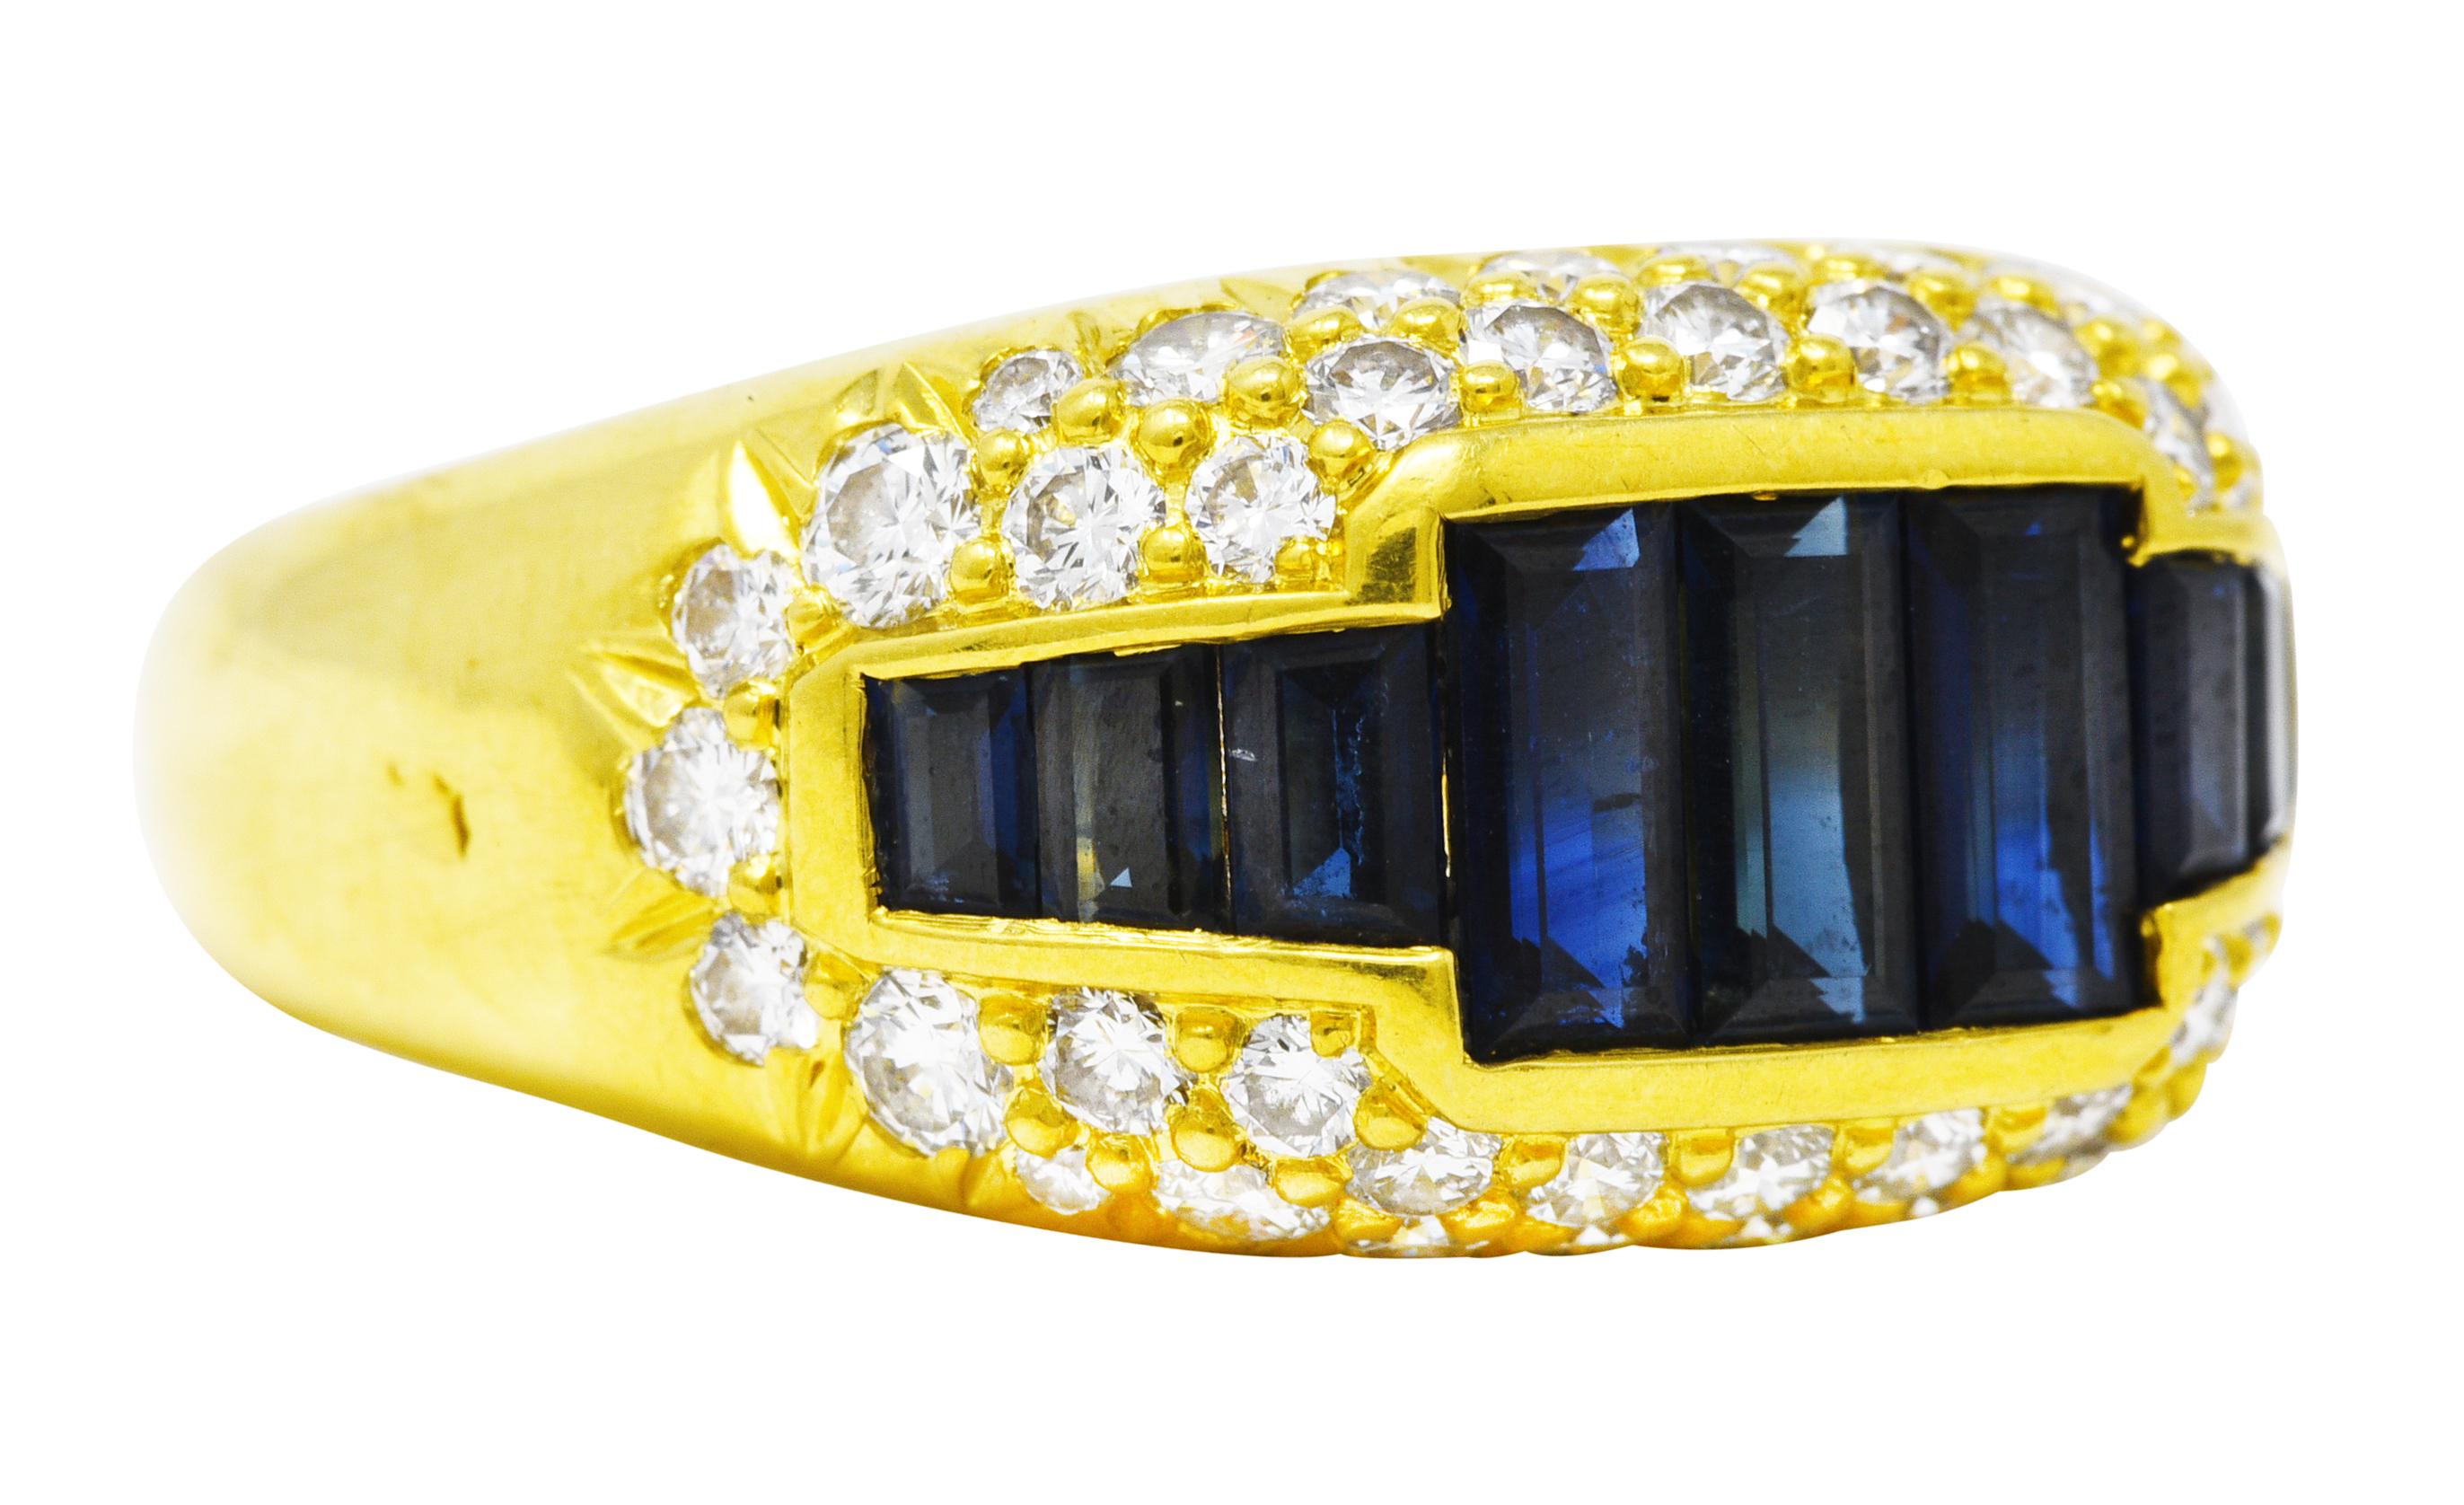 Bombè band ring centers a central channel of rectangular cut sapphires. Graduating in size while weighing in total approximately 1.50 carats. Very well matched in saturated royal blue color. Surrounded by pavé set round brilliant cut diamonds.